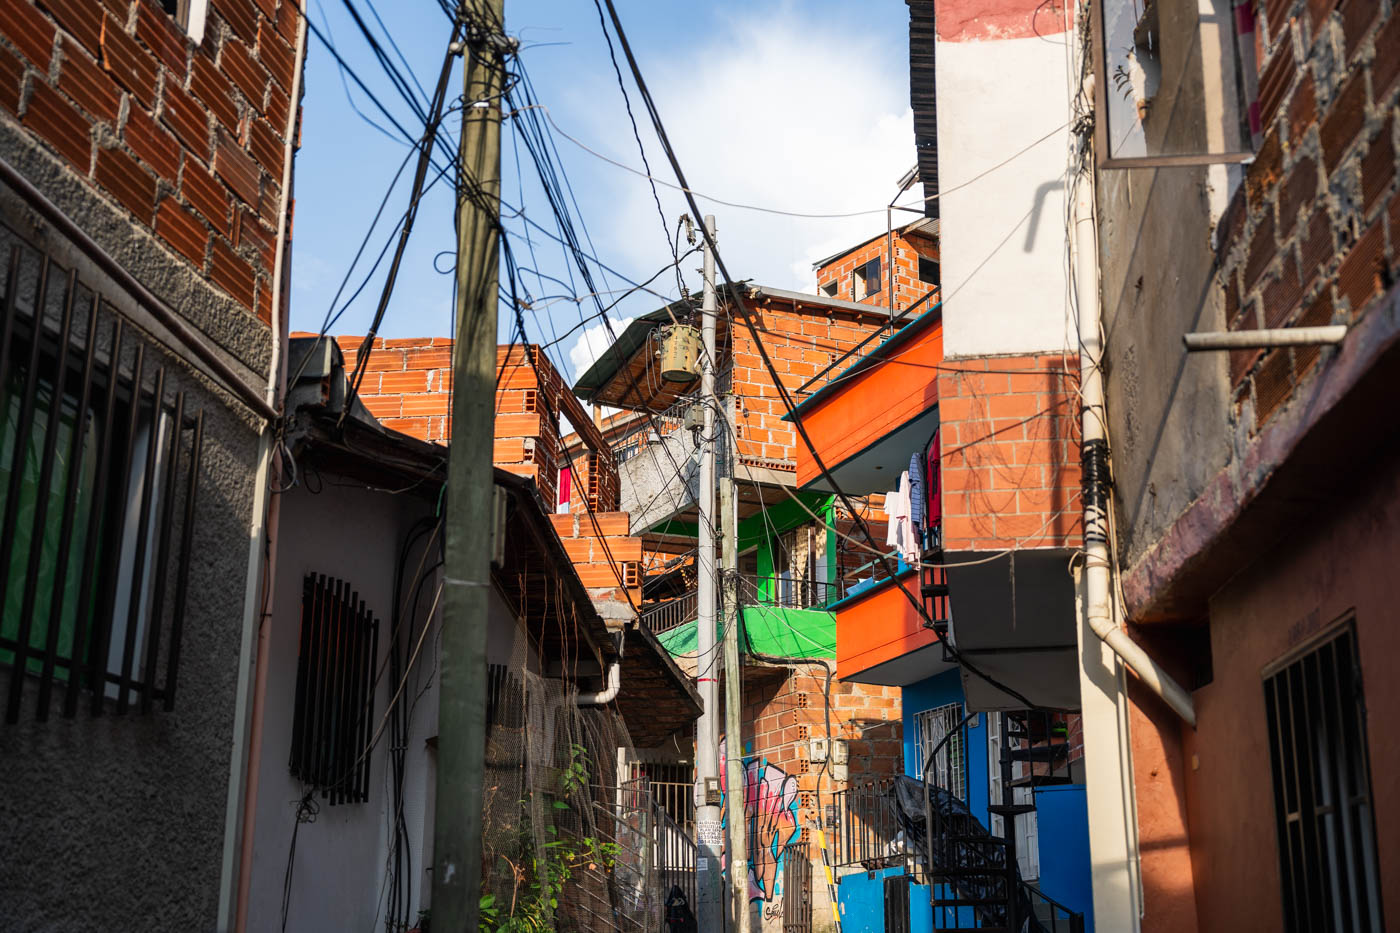 Wires snaking through a small alley in Comuna 13.